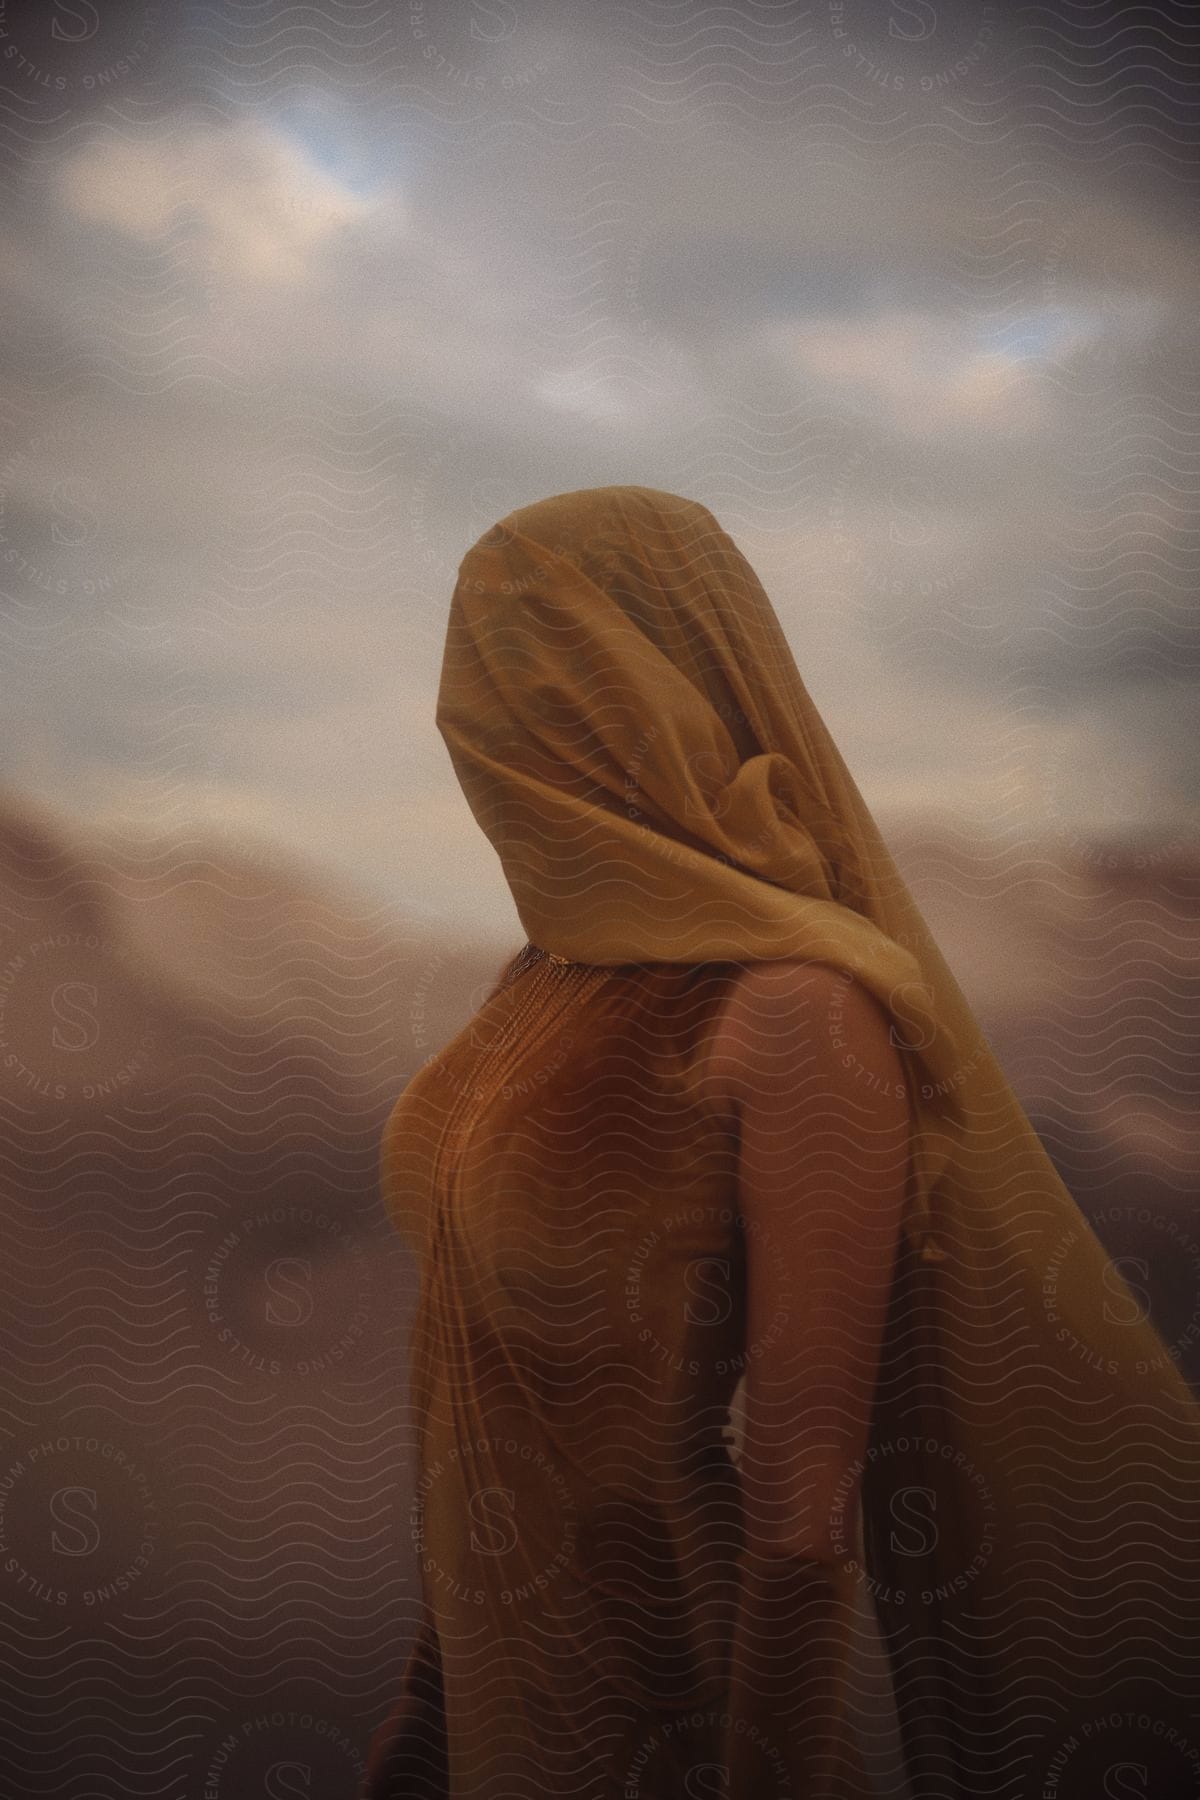 Woman wearing a suede dress with a veil covering her face in a natural desert environment with a blurred background